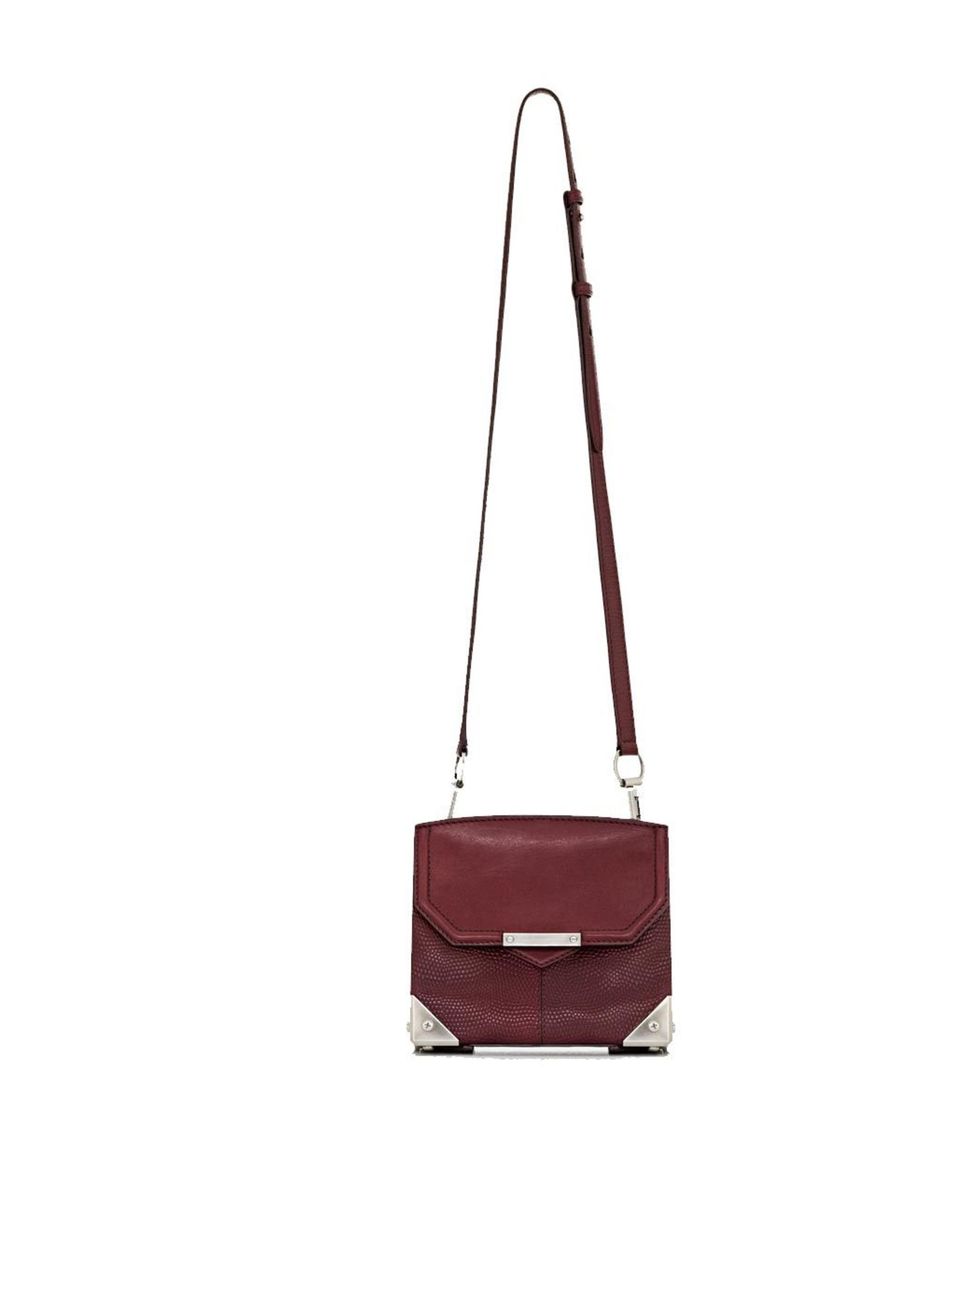 <p>Alexander Wang 'Marion' bag in oxblood printed lizard, price on request, Available at Dover Street Market, for stockists call 0207 518 0680</p>